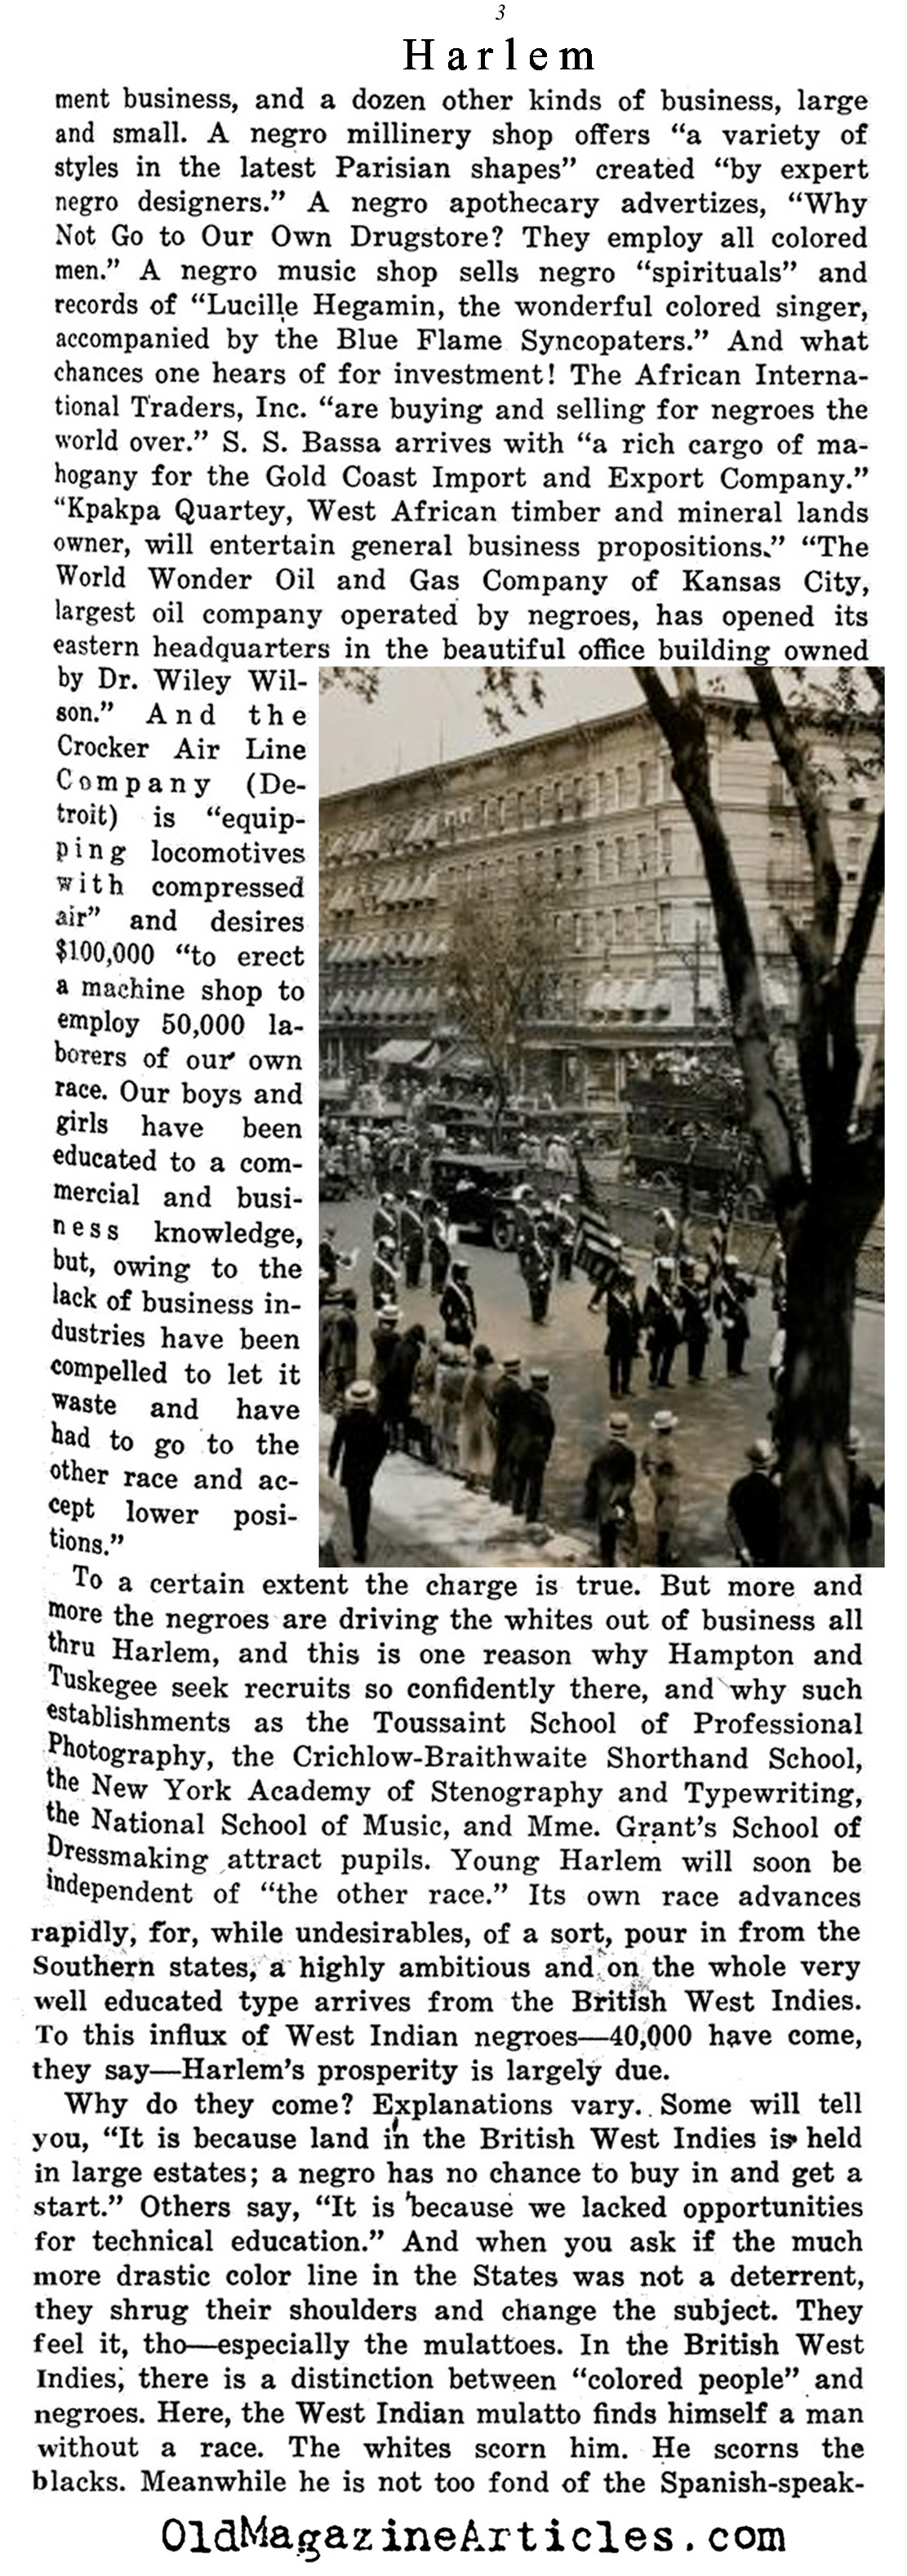 The Backdrop of the Harlem Renaissance   (The Independent, 1921)